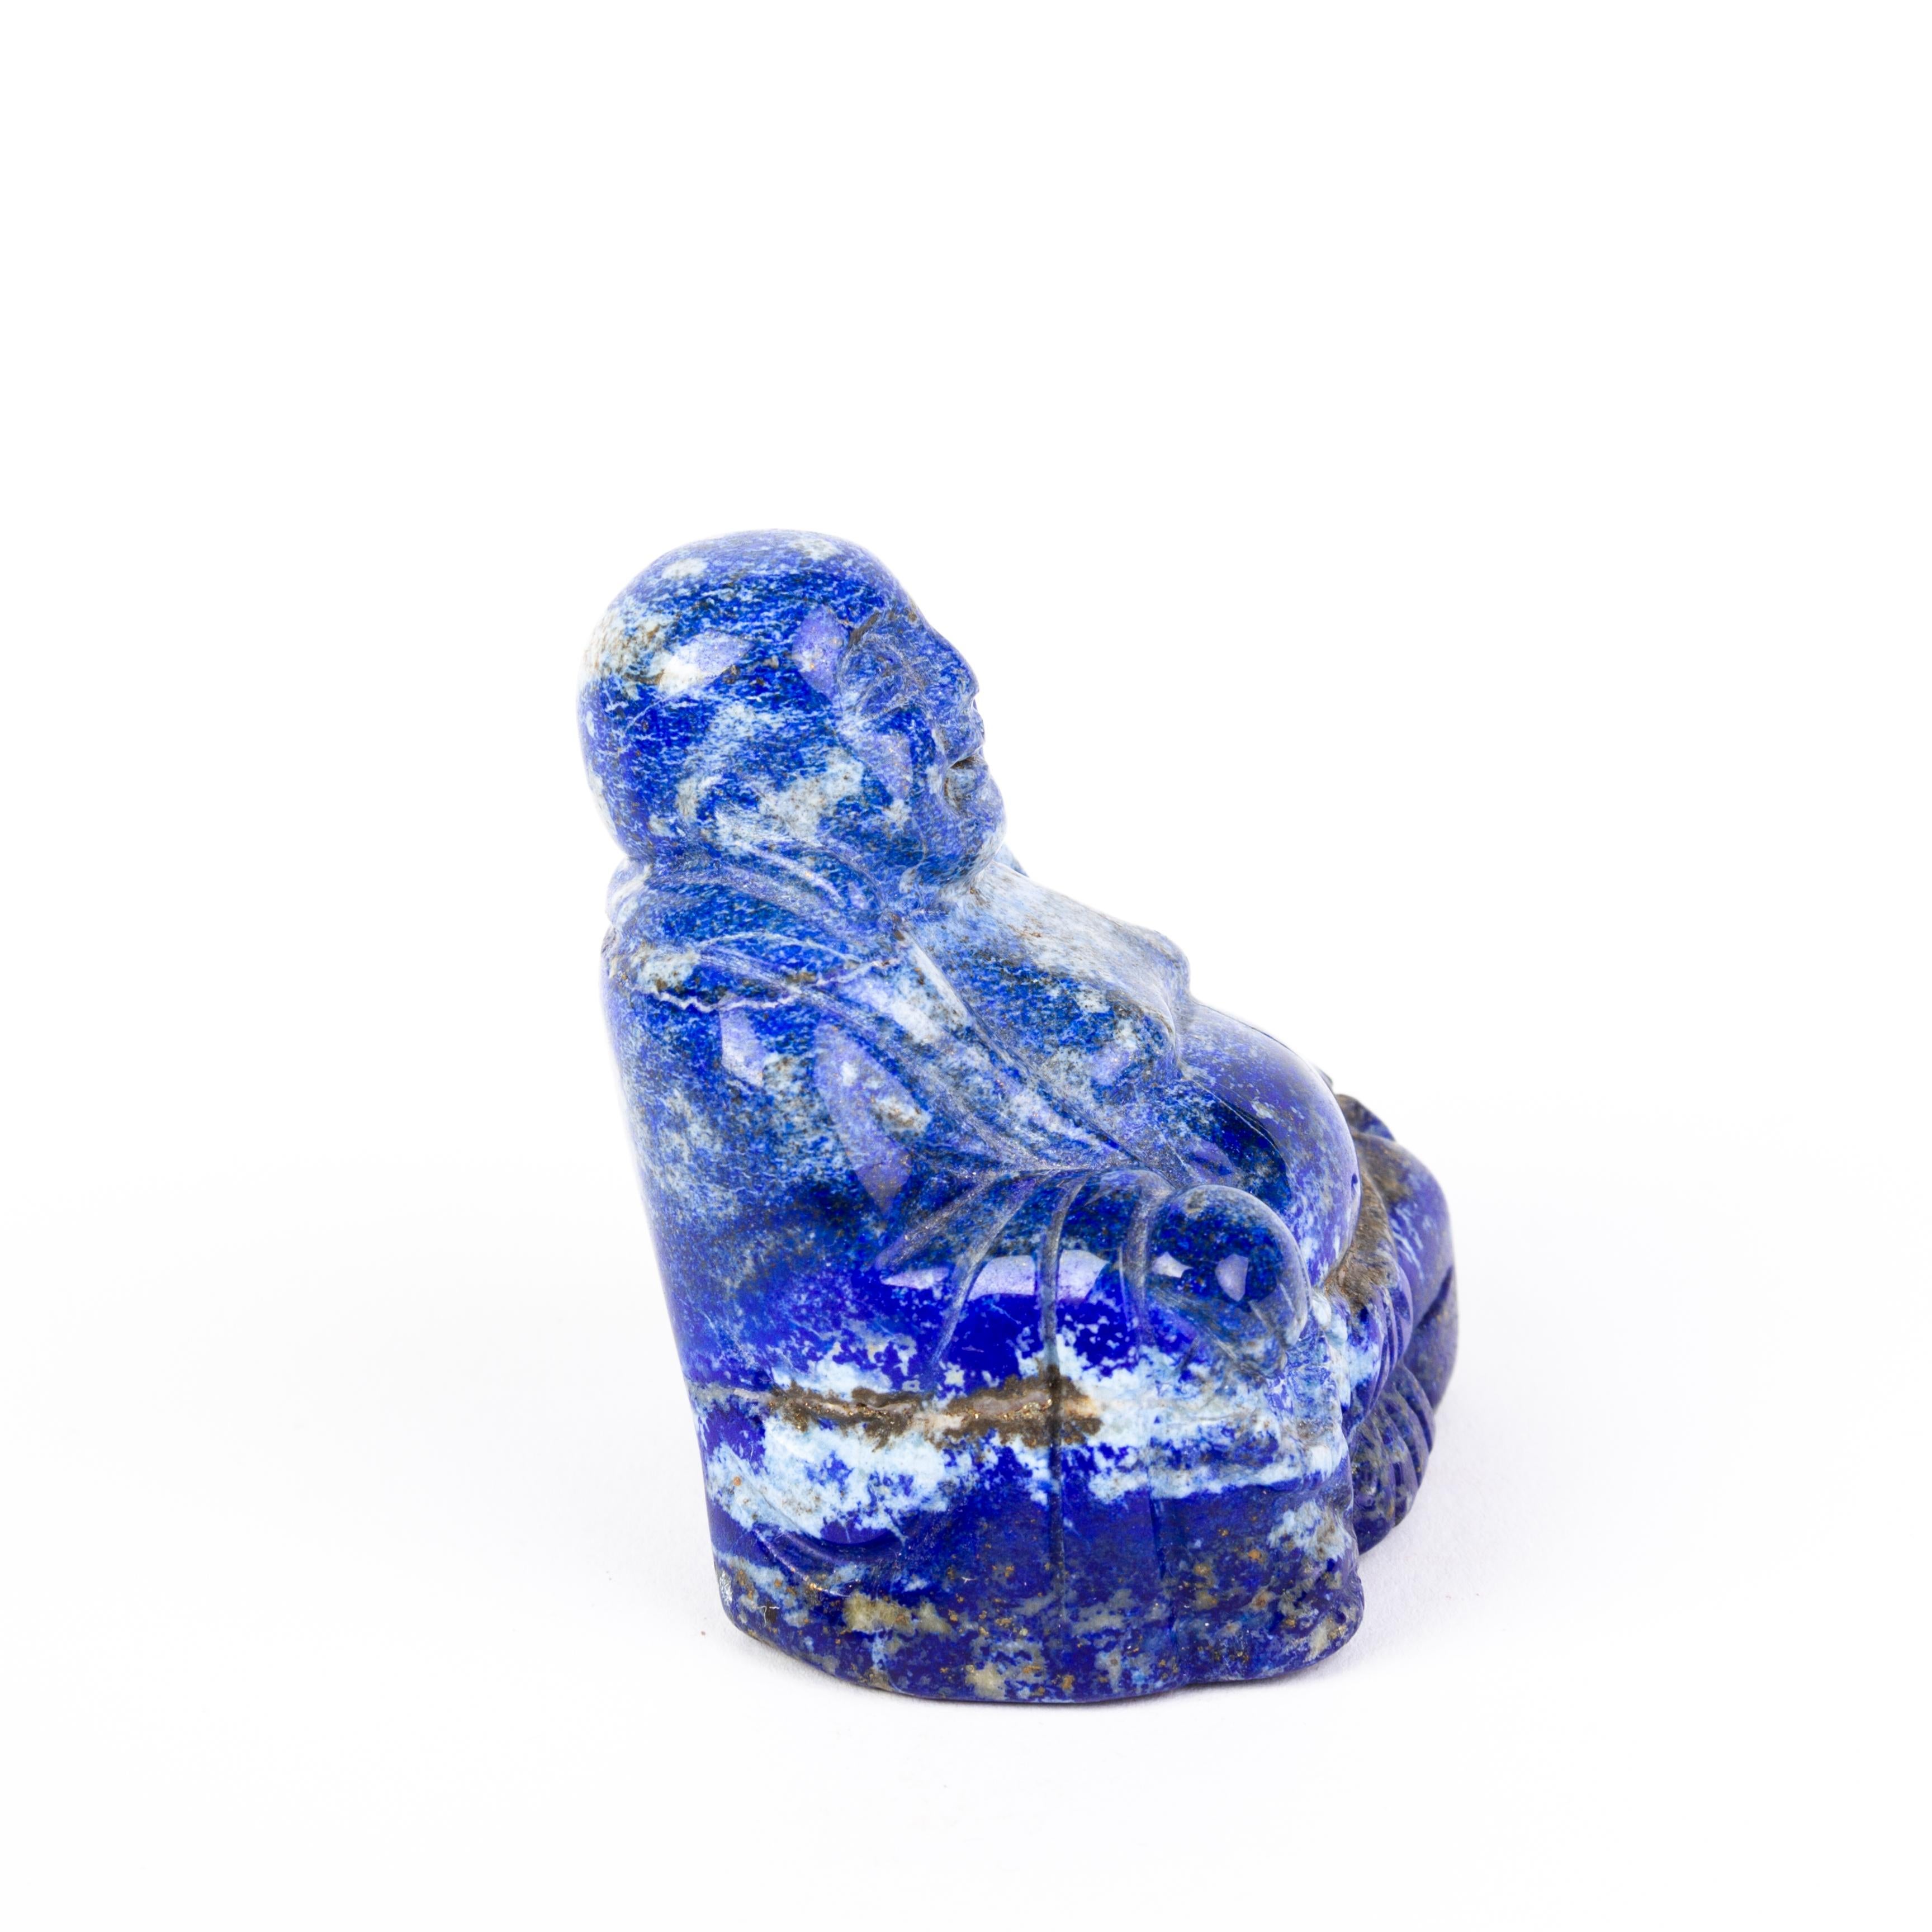 A finely carved Chinese lapis lazuli sculpture of Buddha.
1820 to 1880 China, Qing Dynasty.
Very good condition.
From a private collection.
Free international shipping.